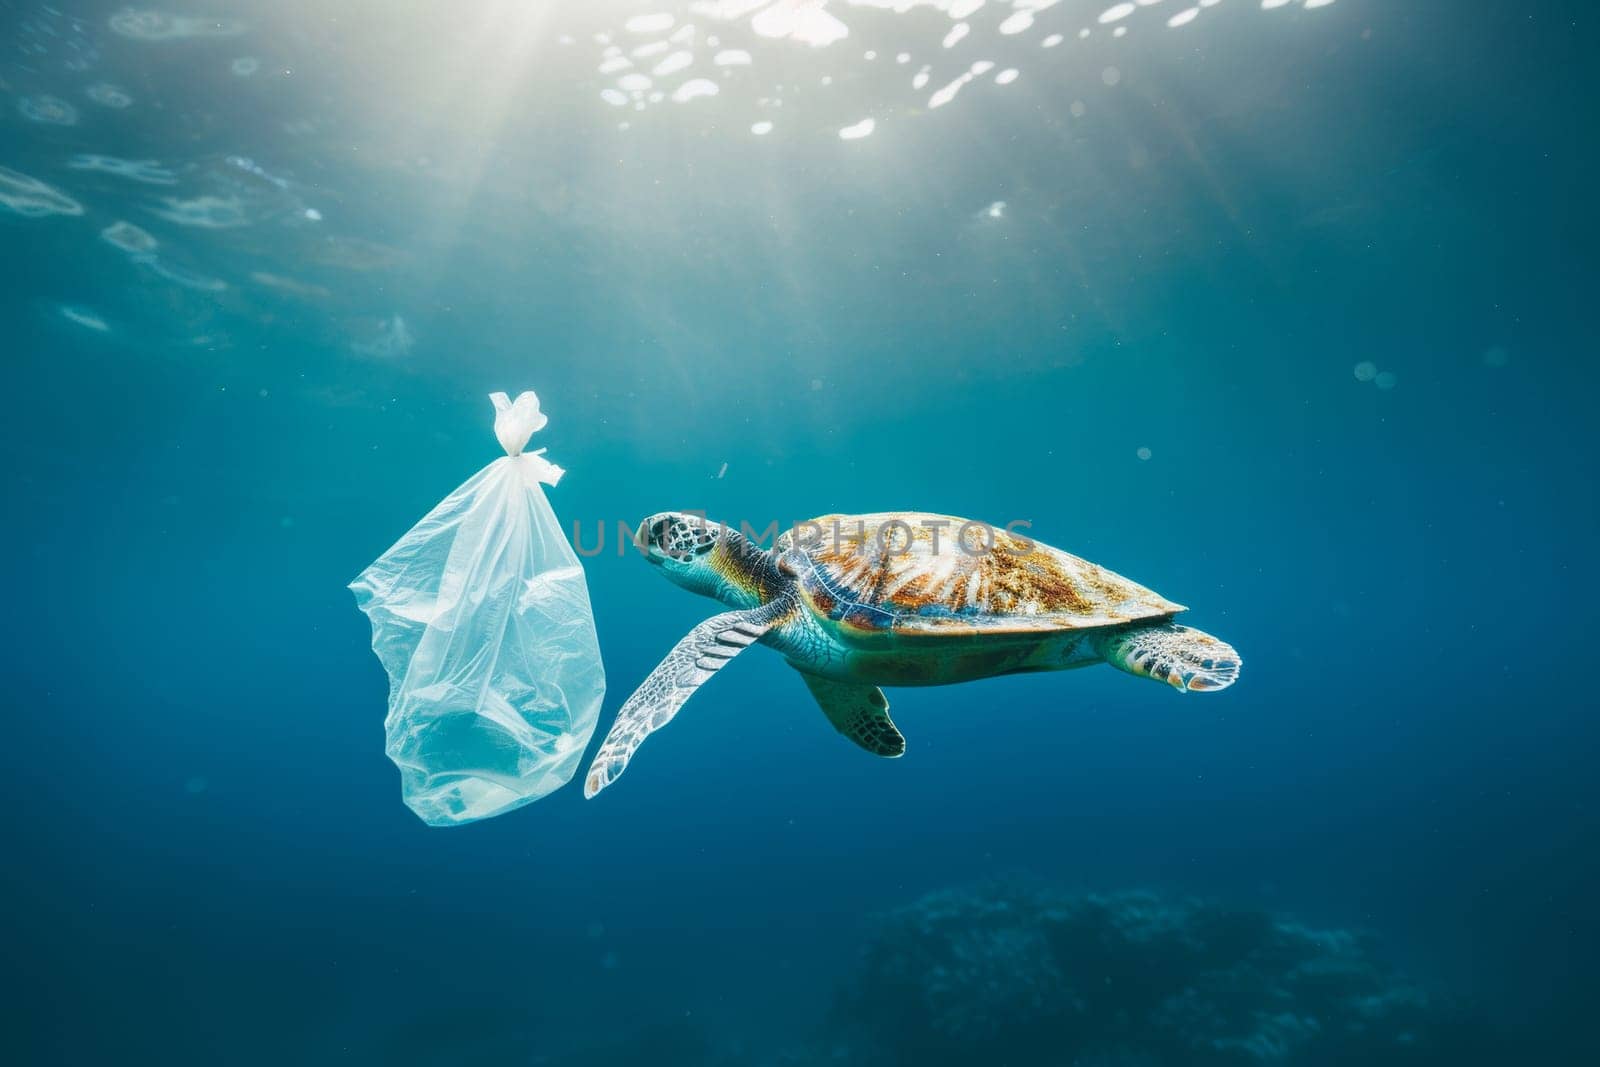 A turtle is seen swimming in the ocean, surrounded by water and a plastic bag floating nearby.